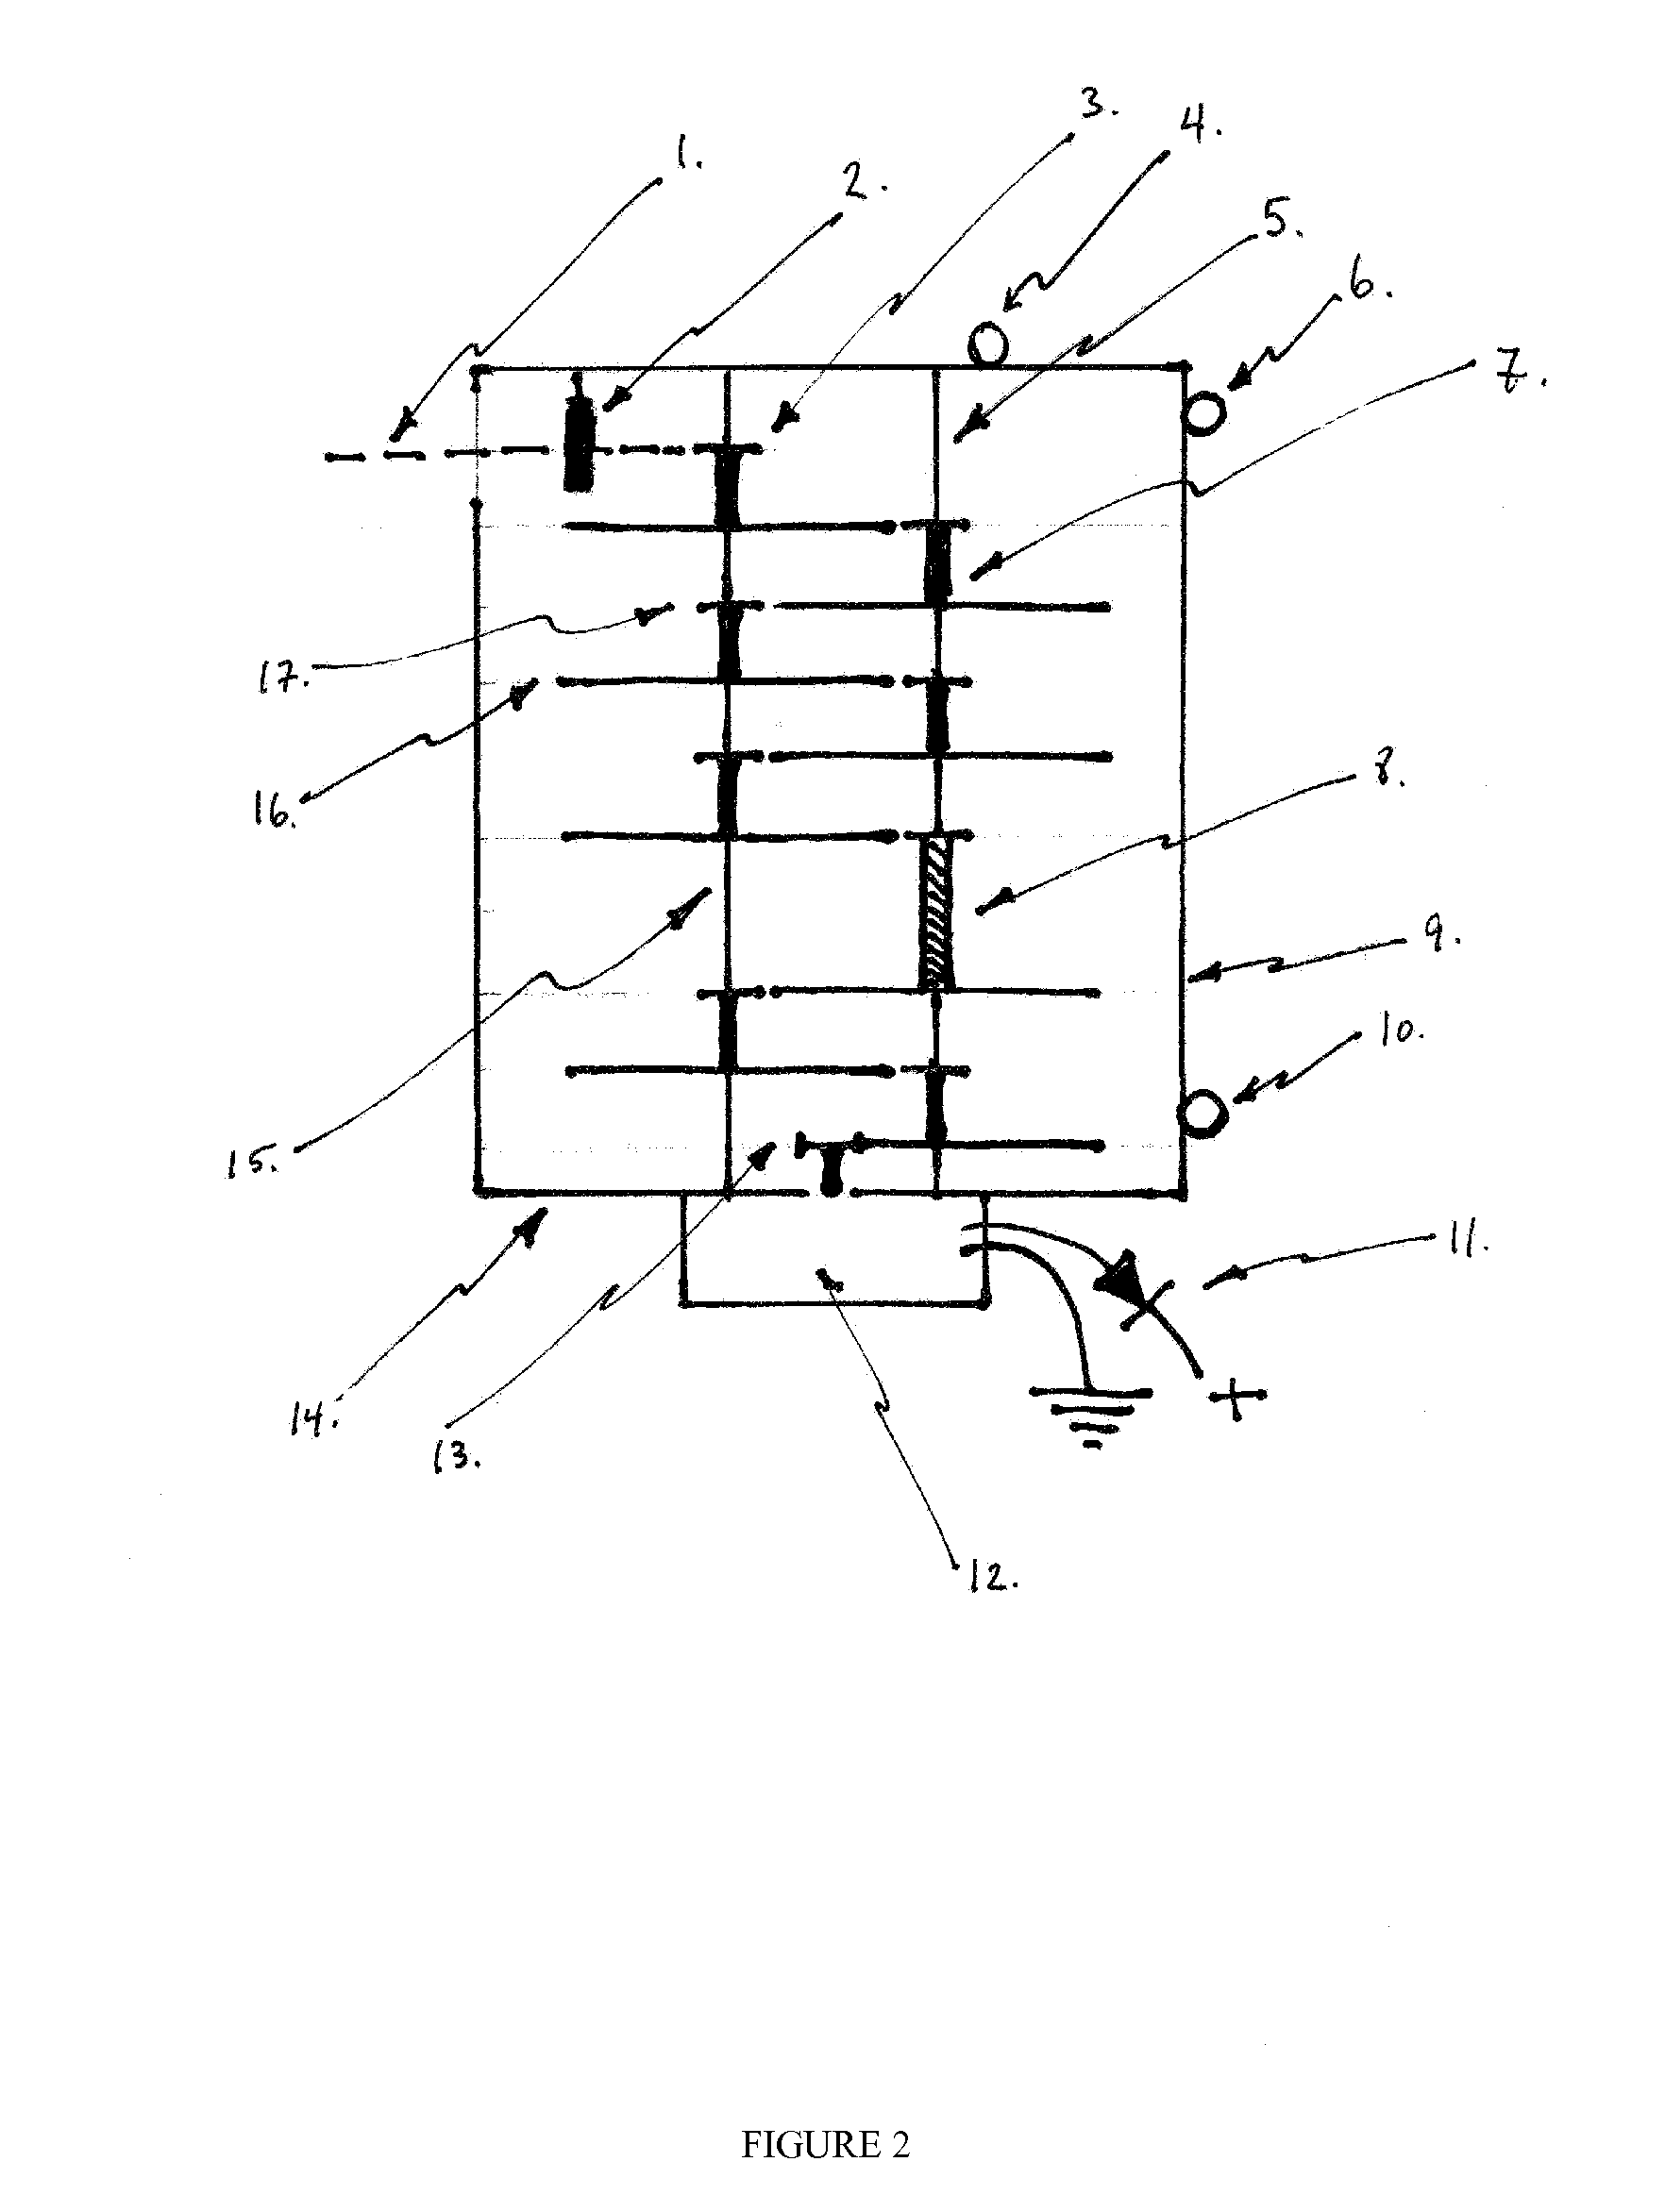 Distributed system of electrical generators utilizing wind driven natural motion of trees